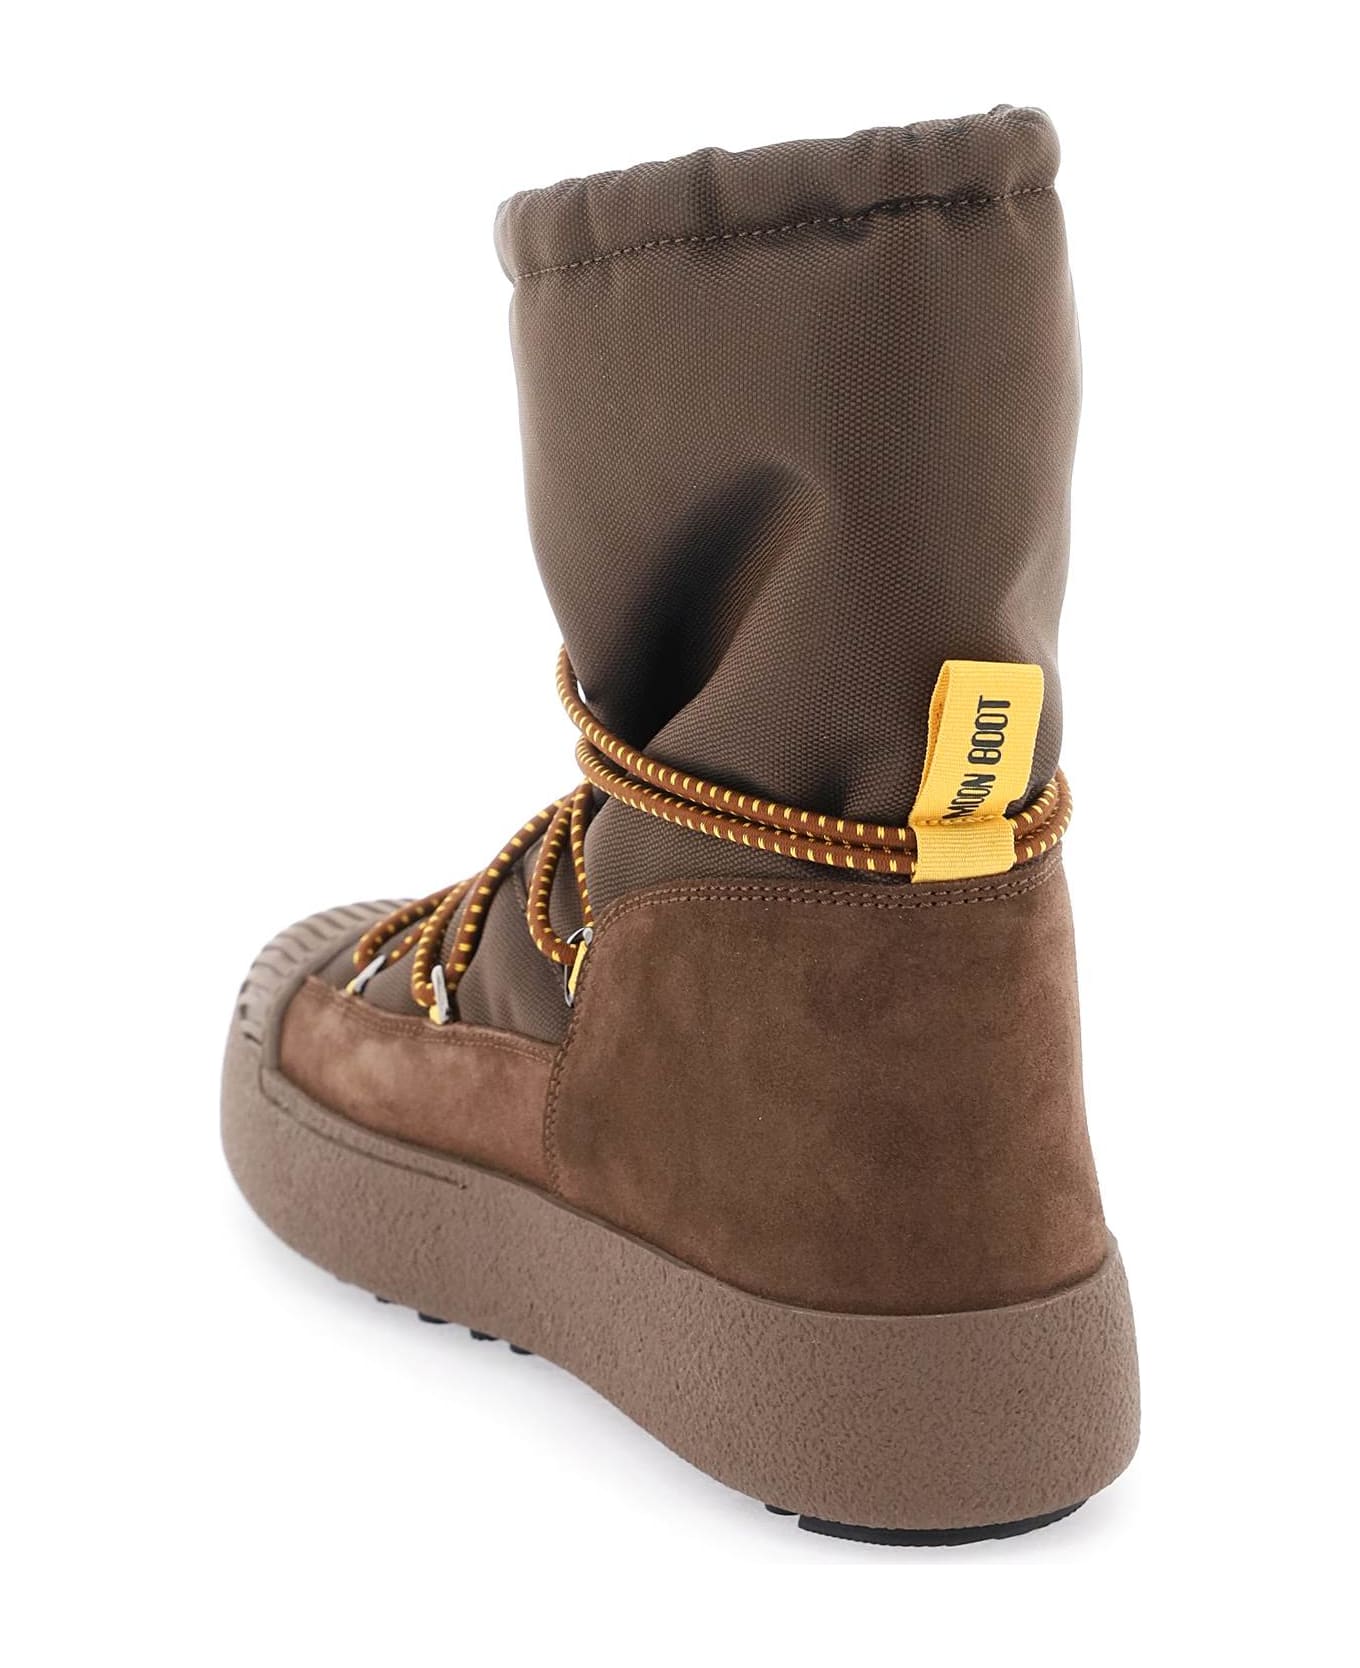 Moon Boot Mtrack Polar Boots - BROWN (Brown)